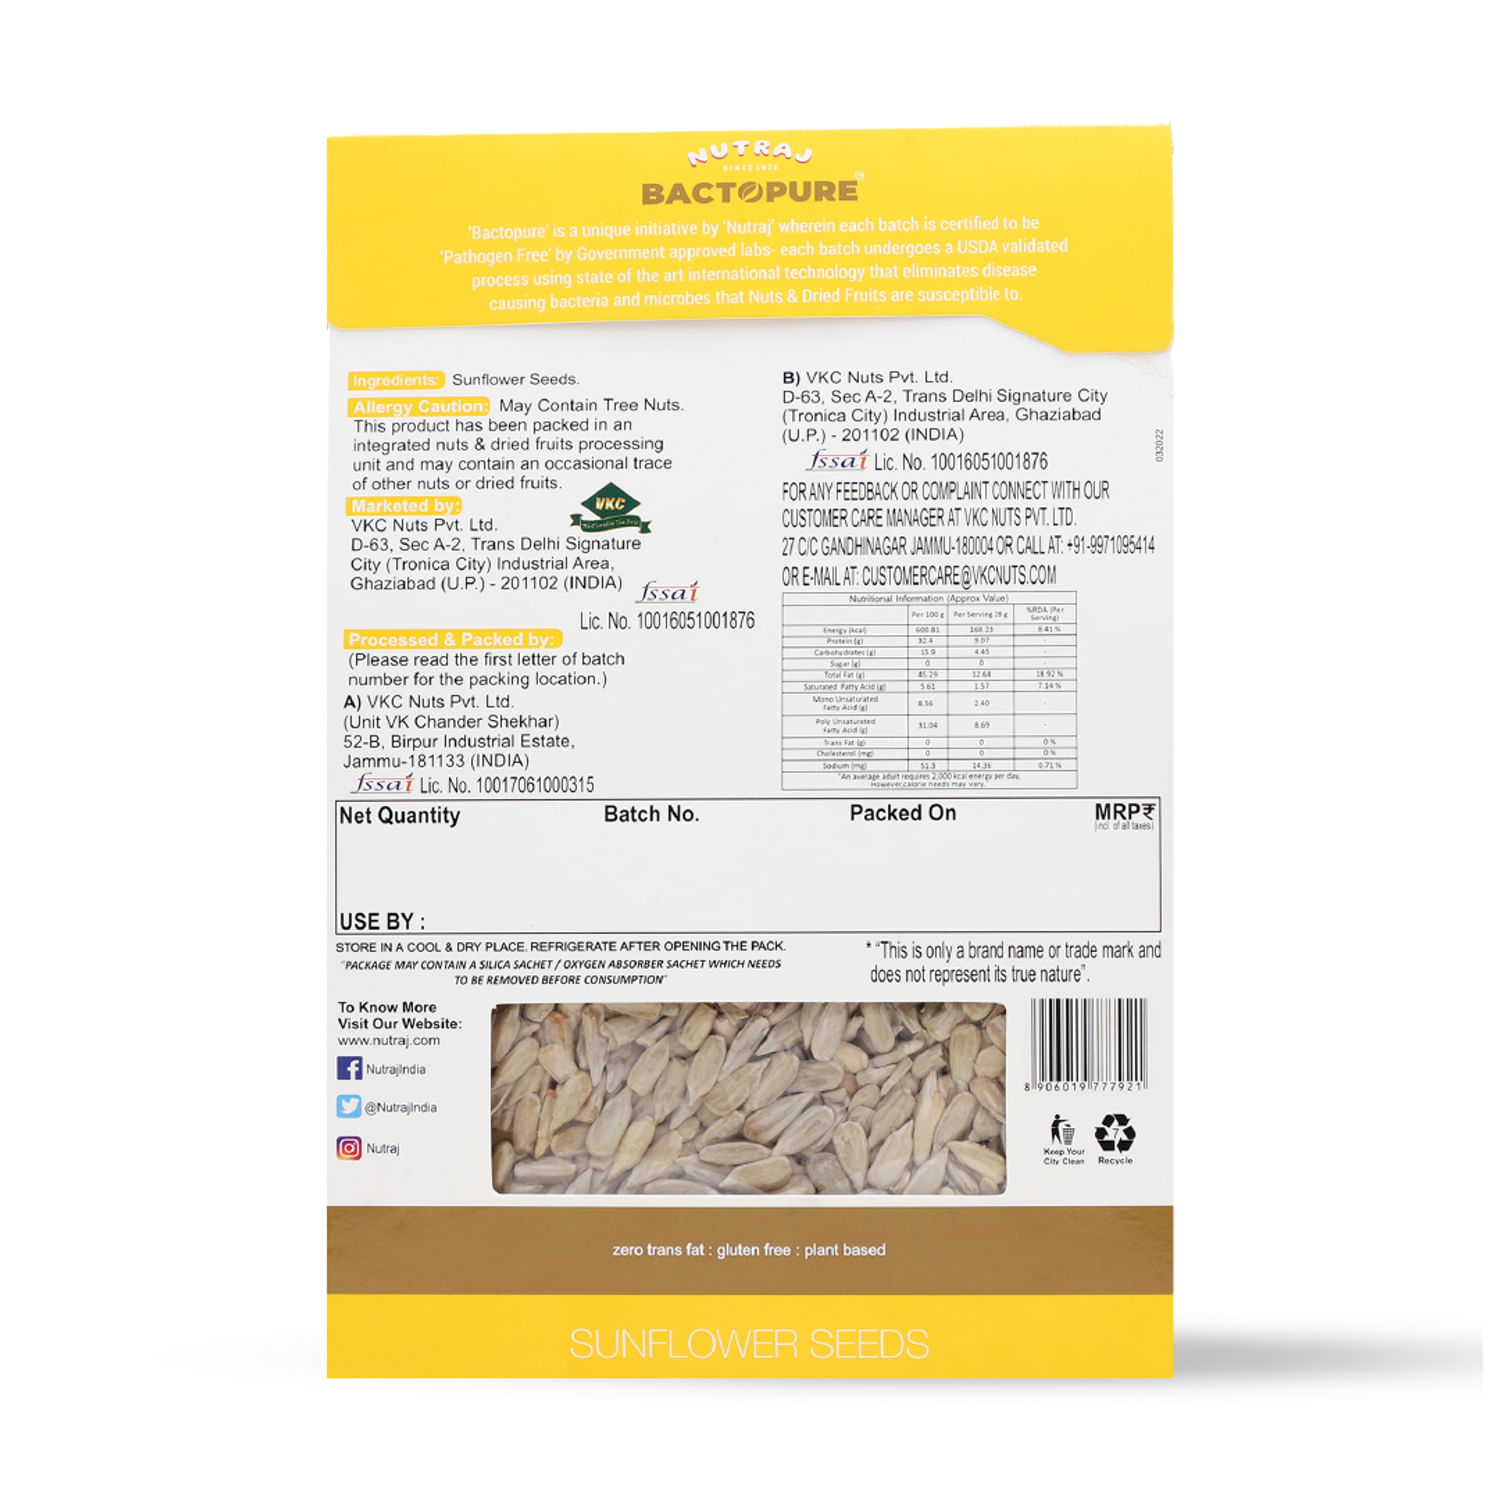 Bactopure Sunflower Seeds 200 gm - Pack of 2